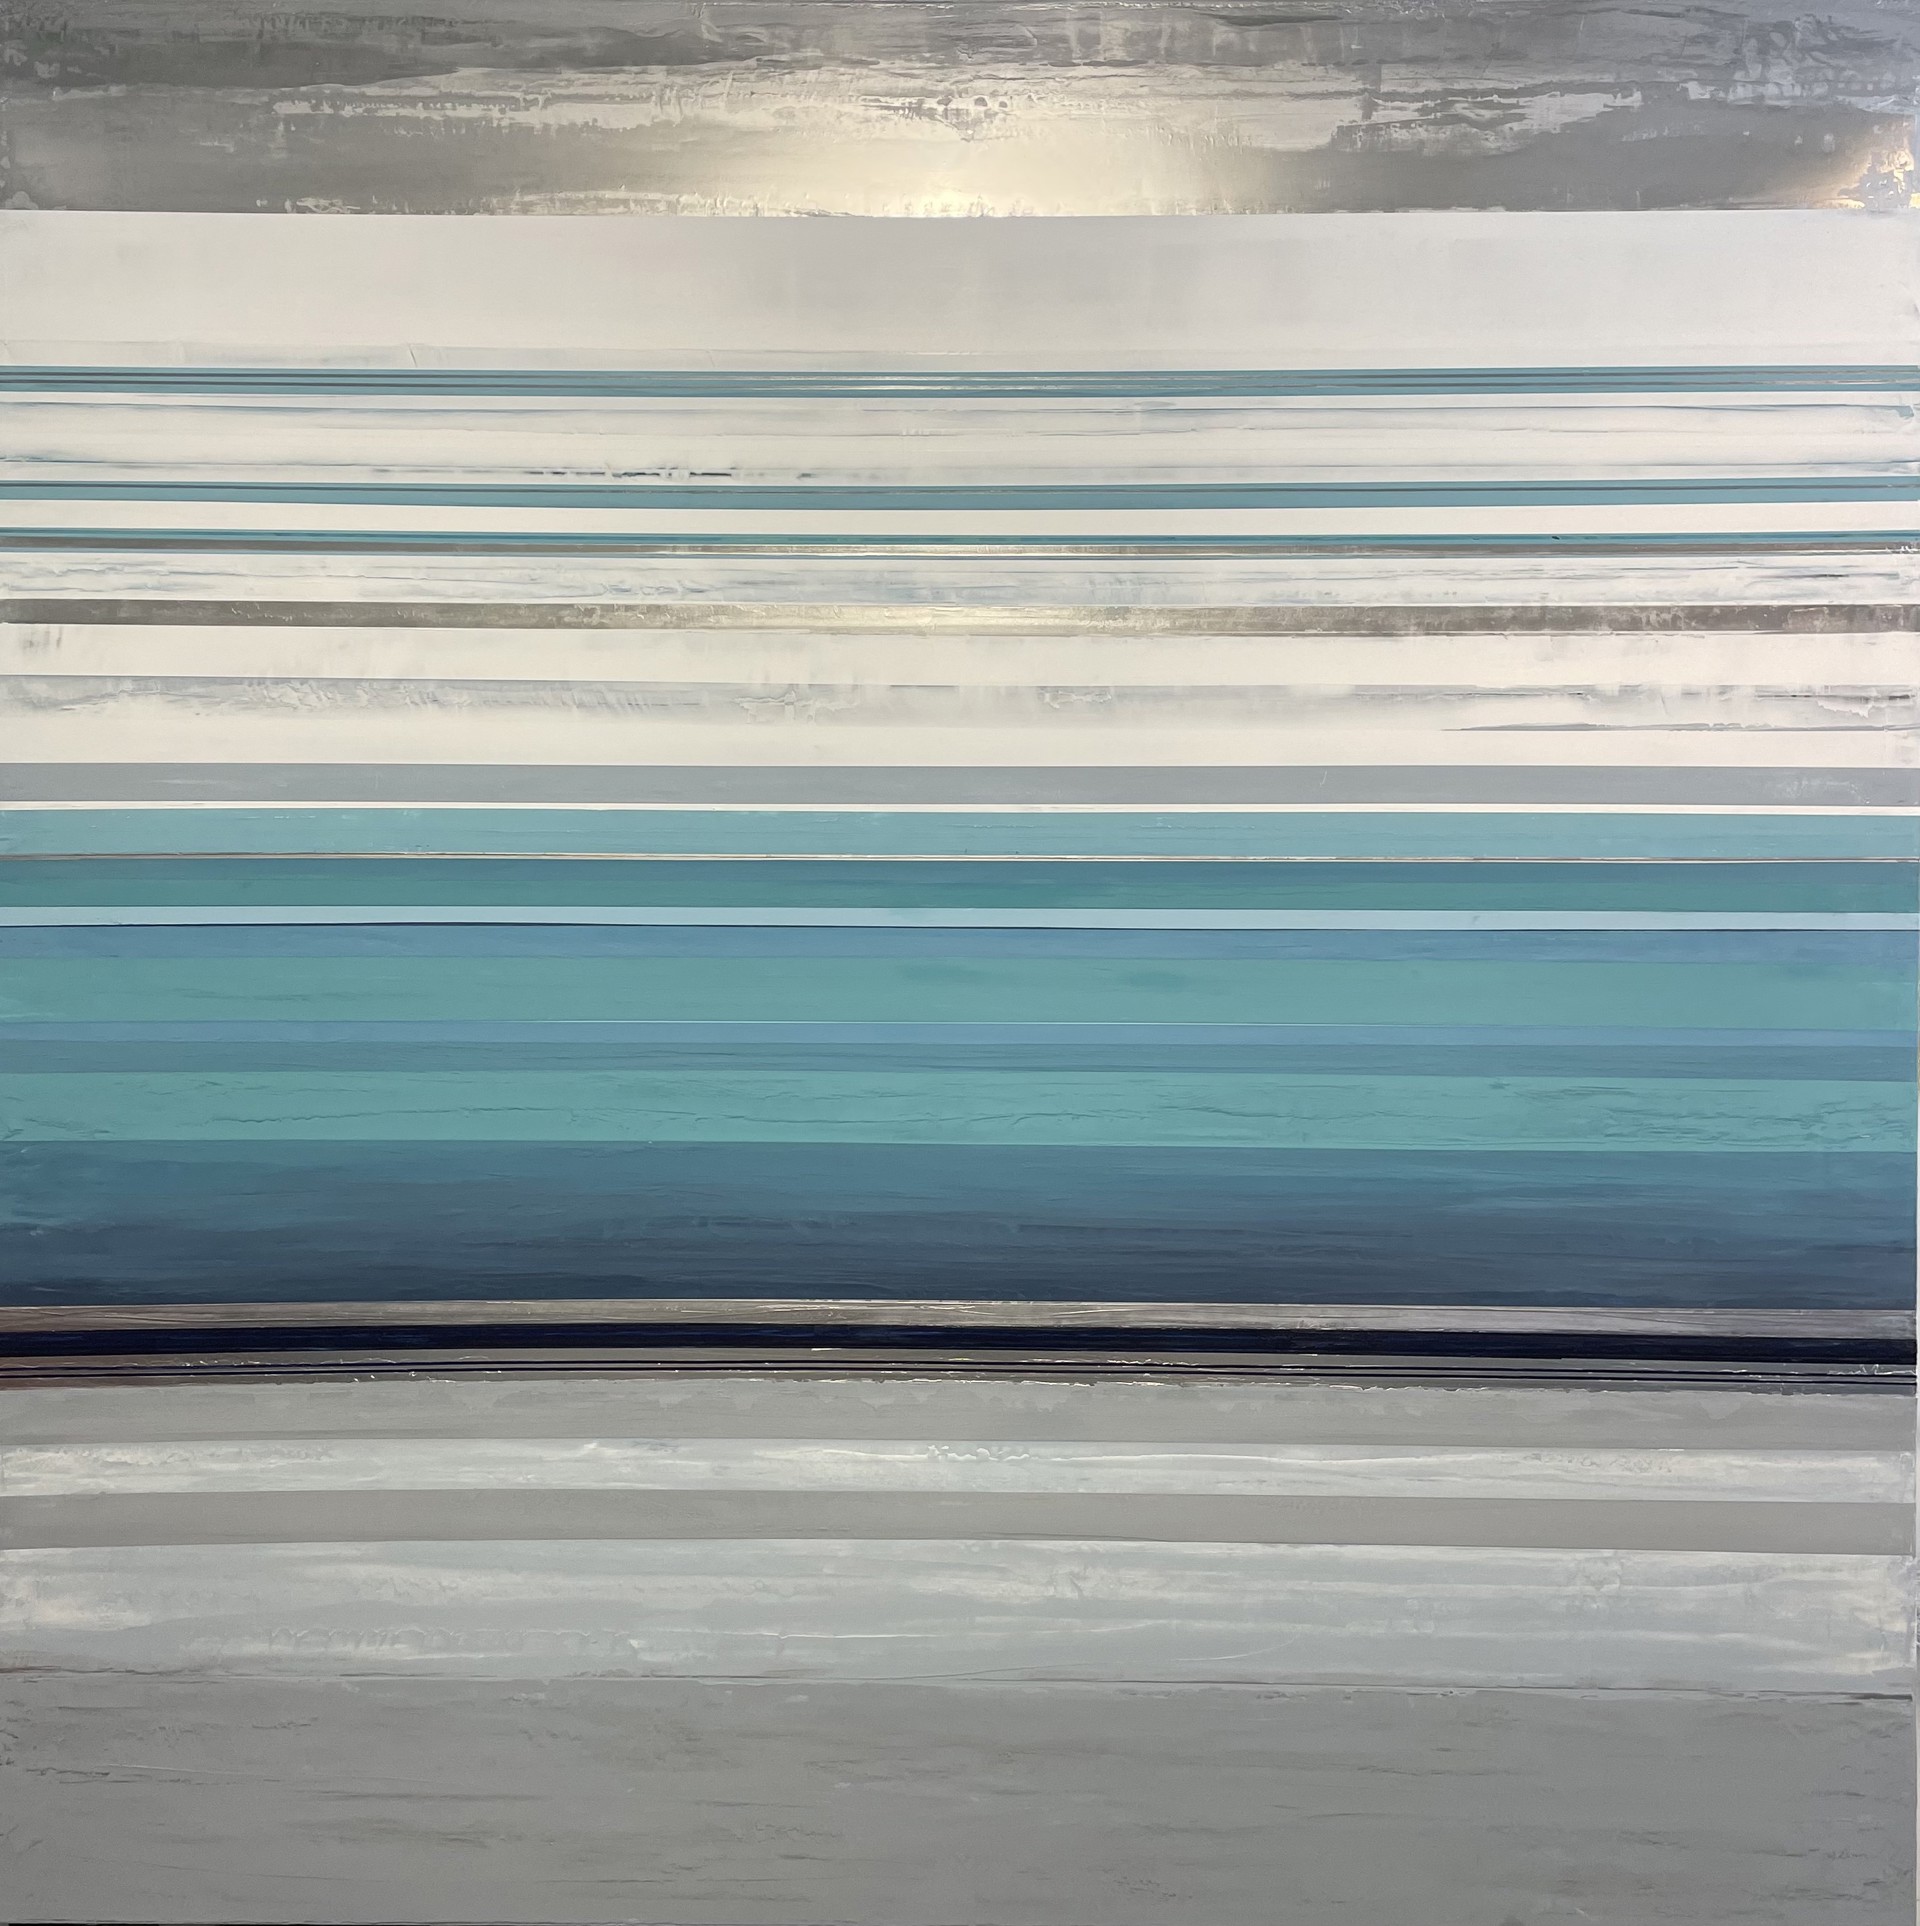 Transcending Light by California artist and painter Stephanie Paige is a 72"H x 72"W abstract with silvers painted lines & marble plaster in turquoises and blues.